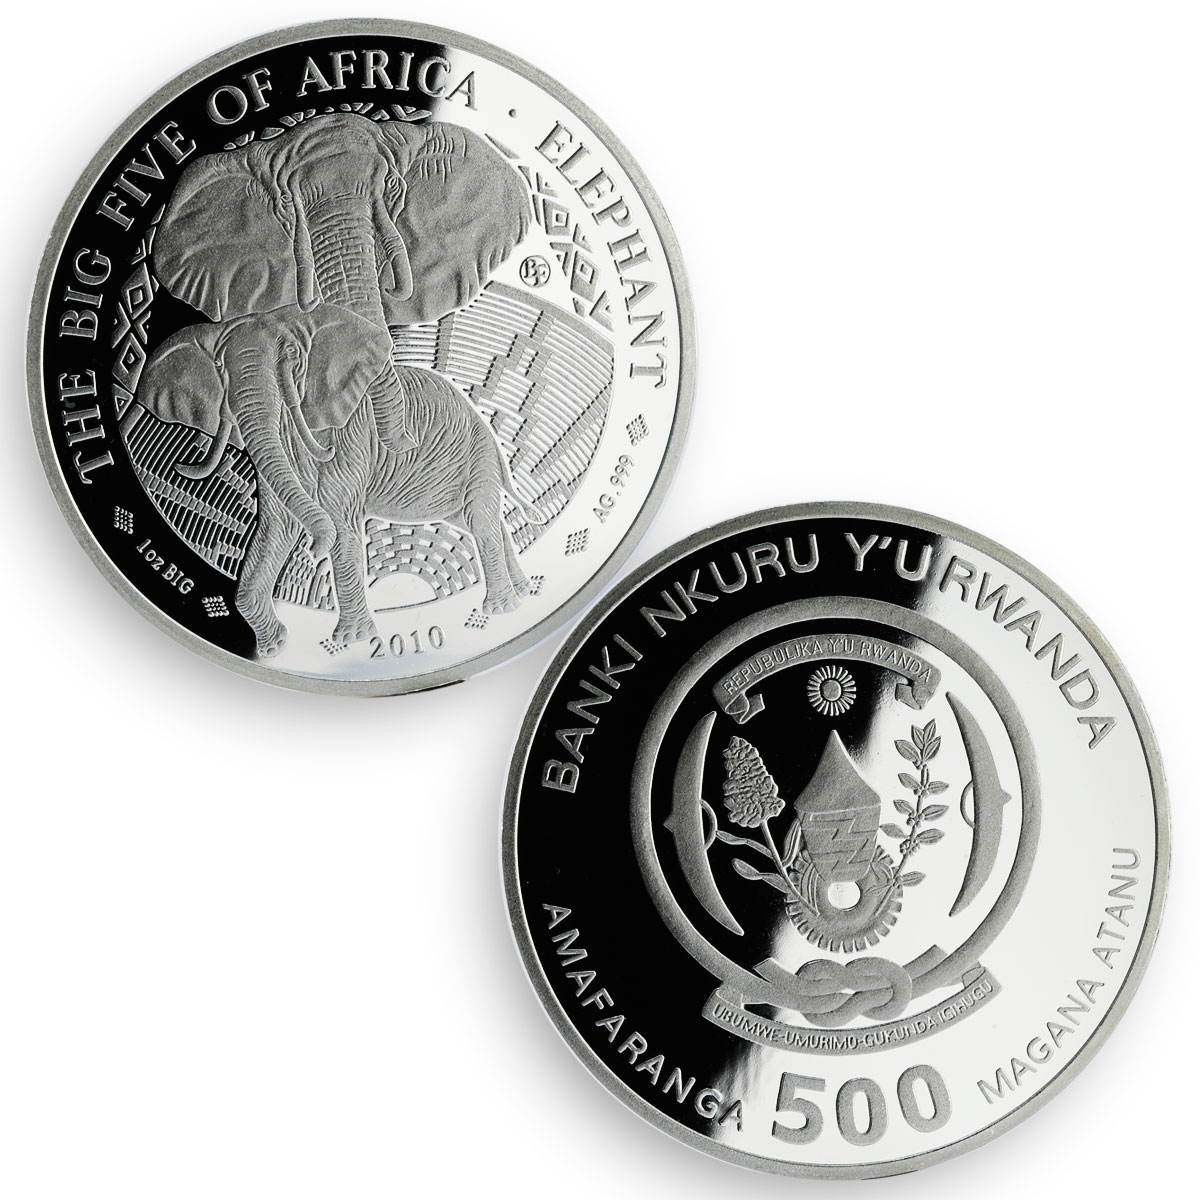 Rwanda 500 francs set of 5 coins The Big Five of Africa silver proof coin 2010